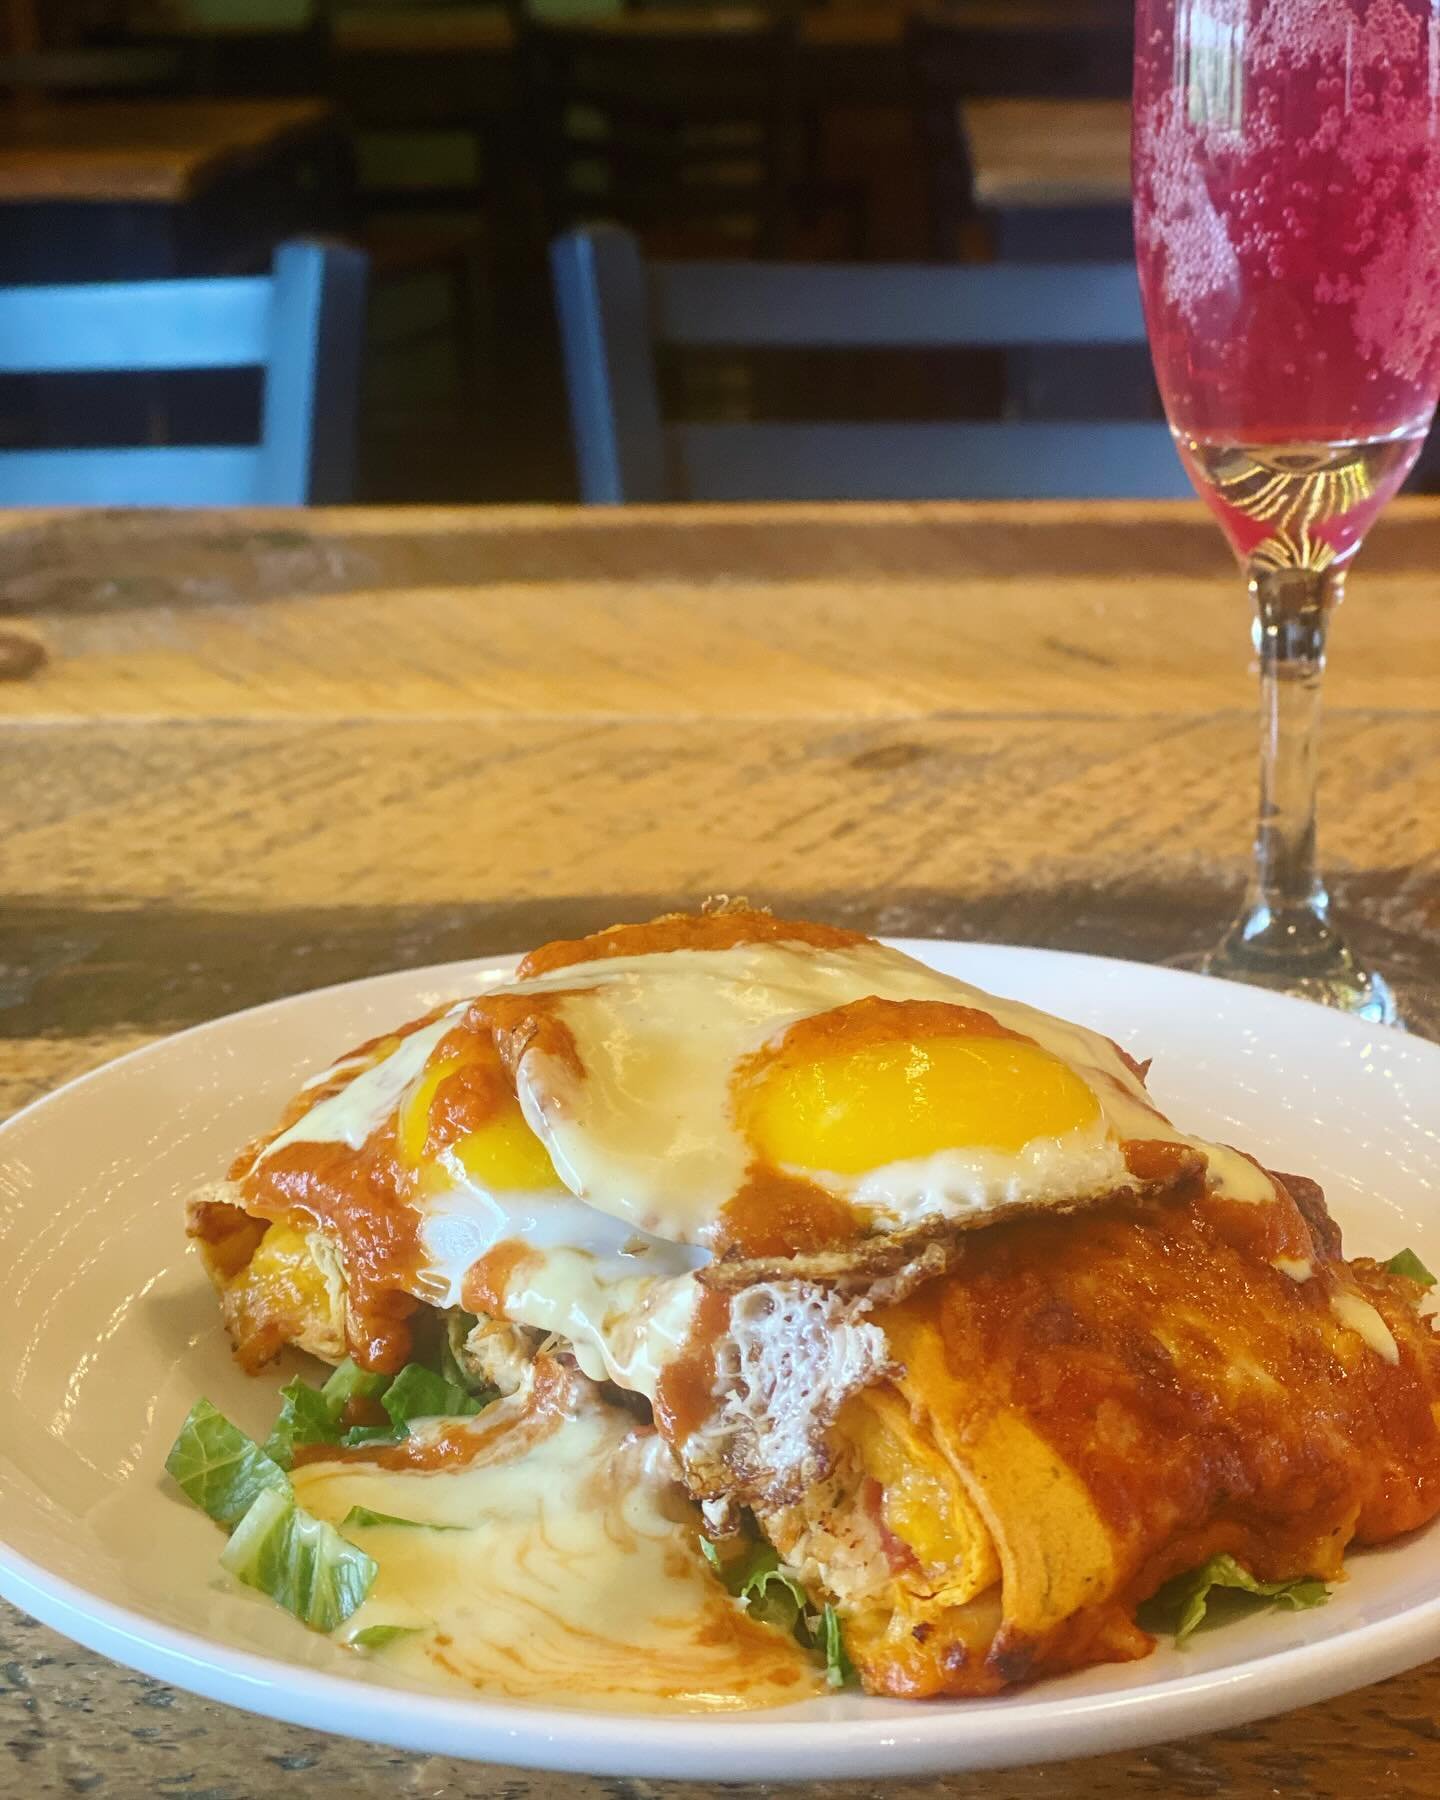 Sip happens, but brunch helps 🍳 🥂 

The whole enchilada 🌮 

Tender shredded chicken and a melty cheese blend snugly tucked in a tortilla! Topped with a dollop of creamy sour cream, two sunny side eggs, a zesty tomato ranchero sauce, and a luscious